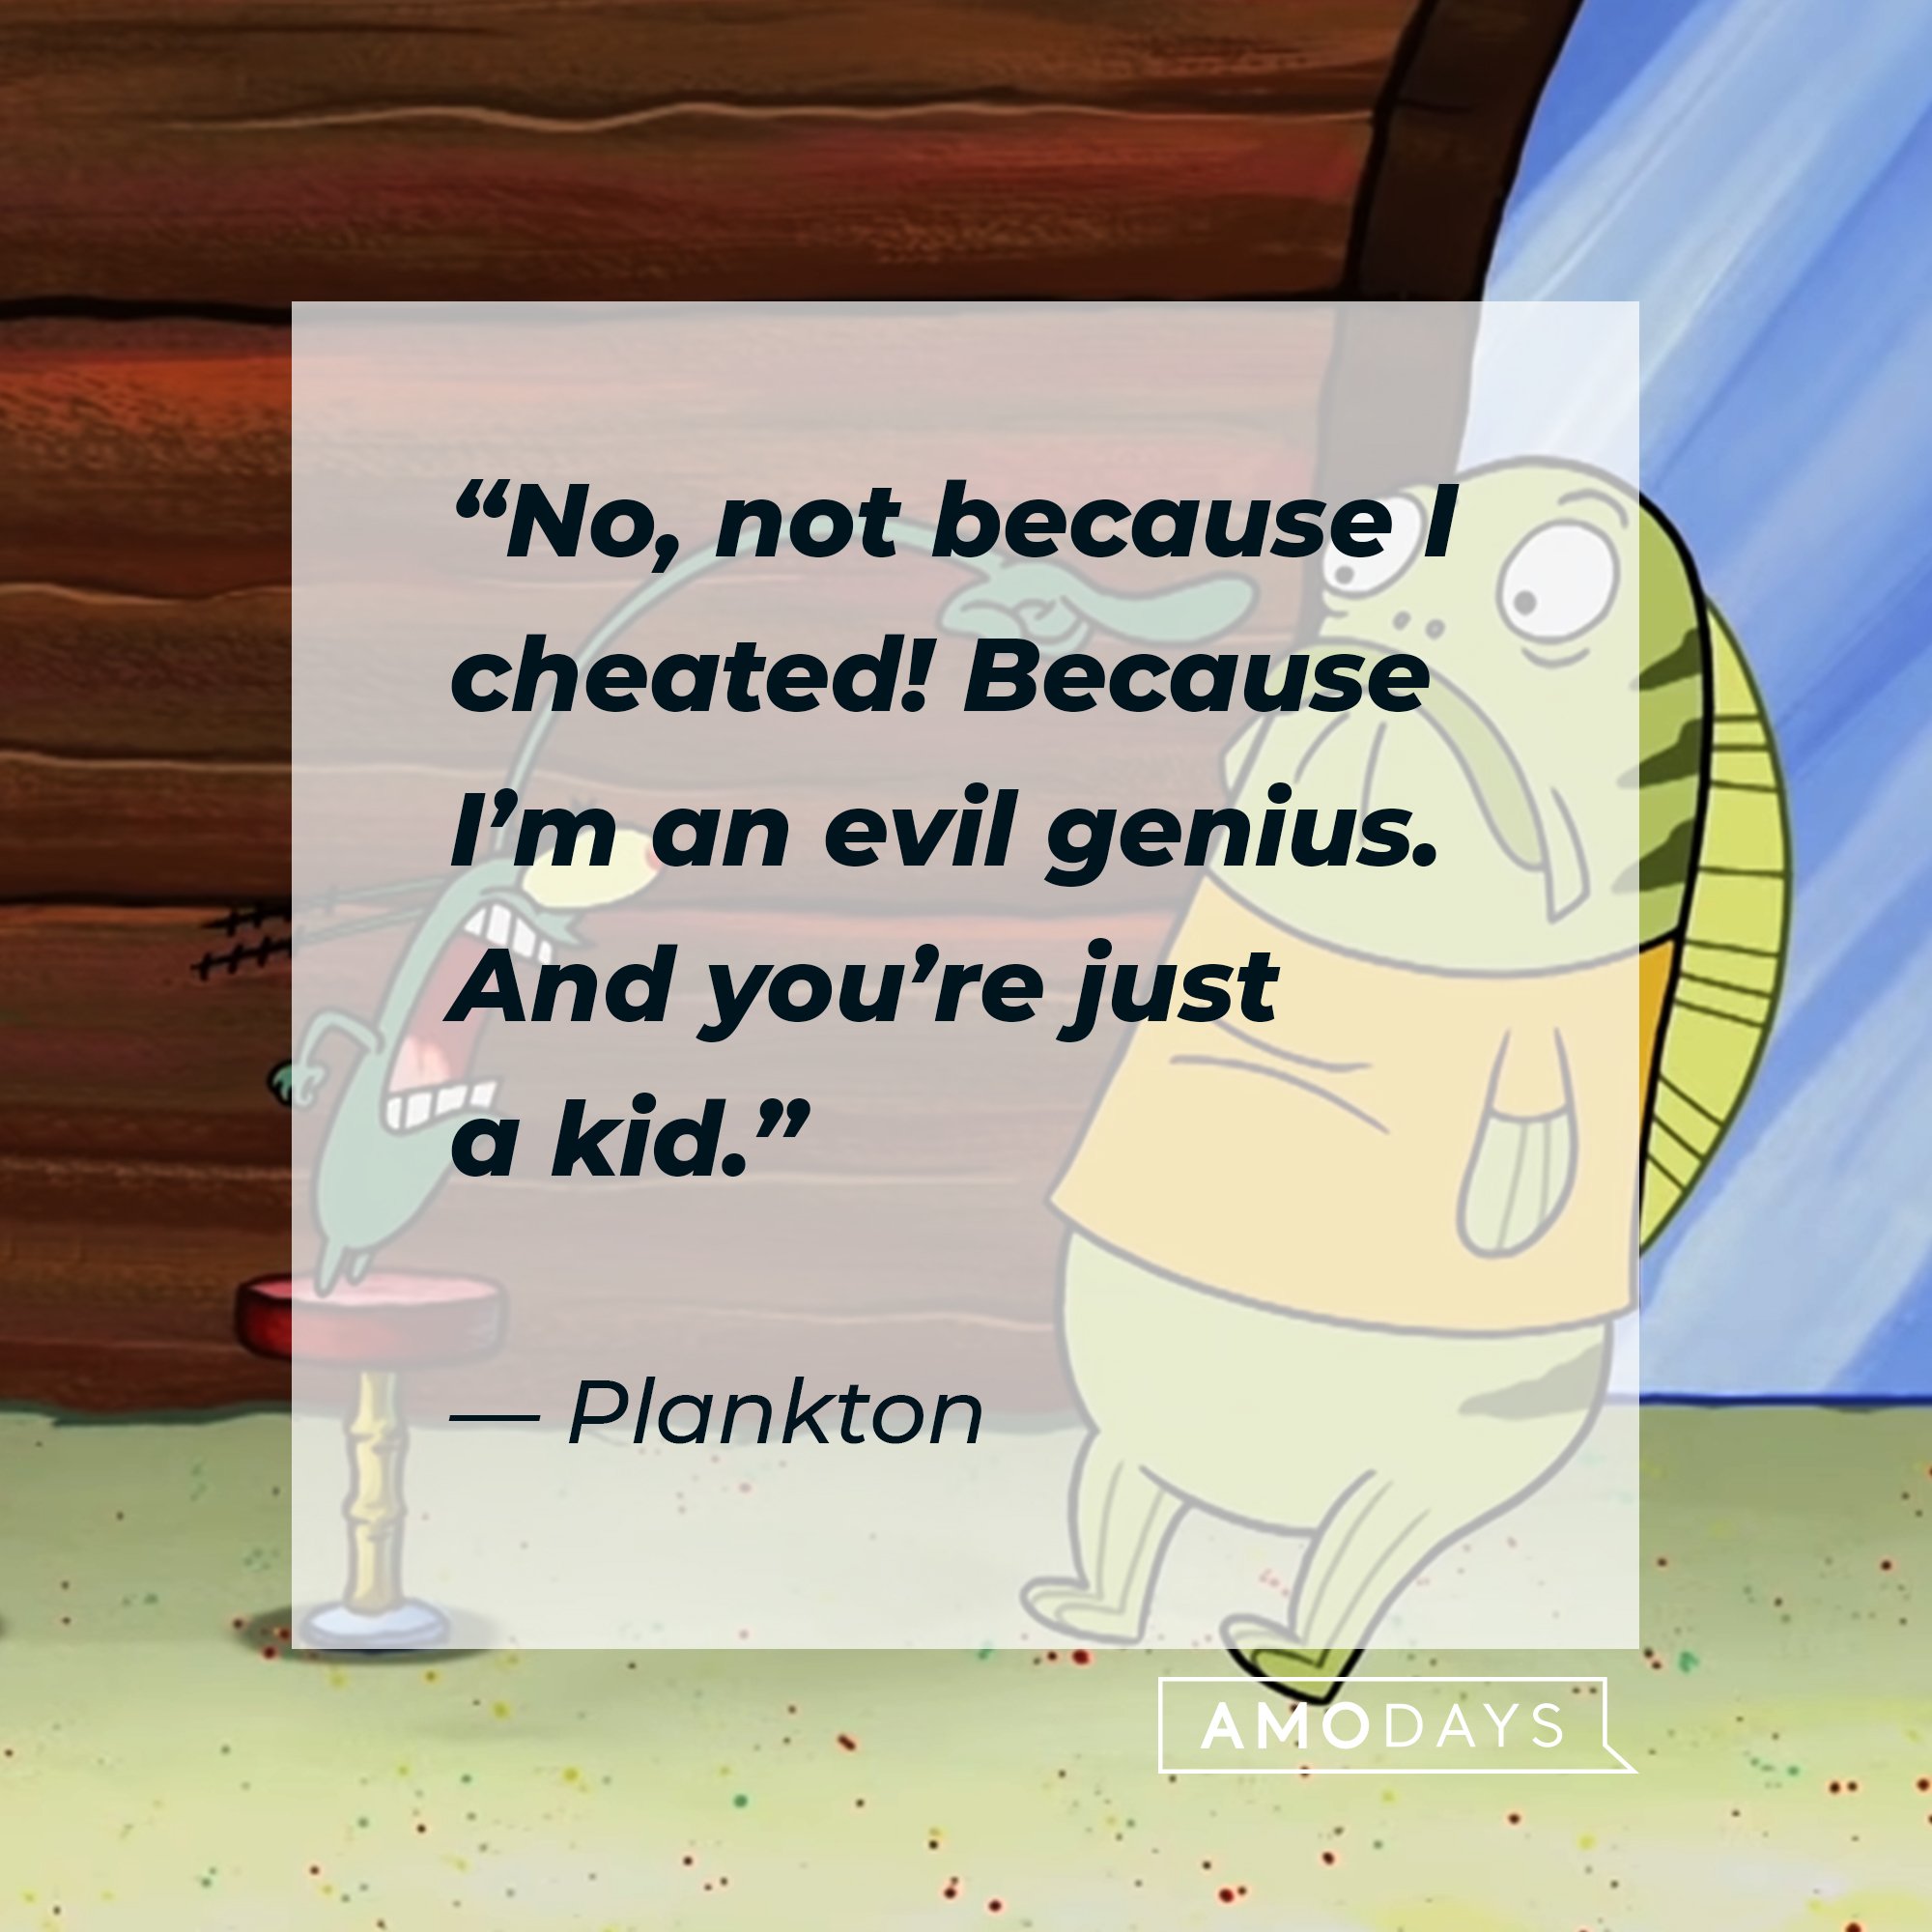 Plankton's quote: “No, not because I cheated! Because I’m an evil genius. And you’re just a kid.” | Image: AmoDays